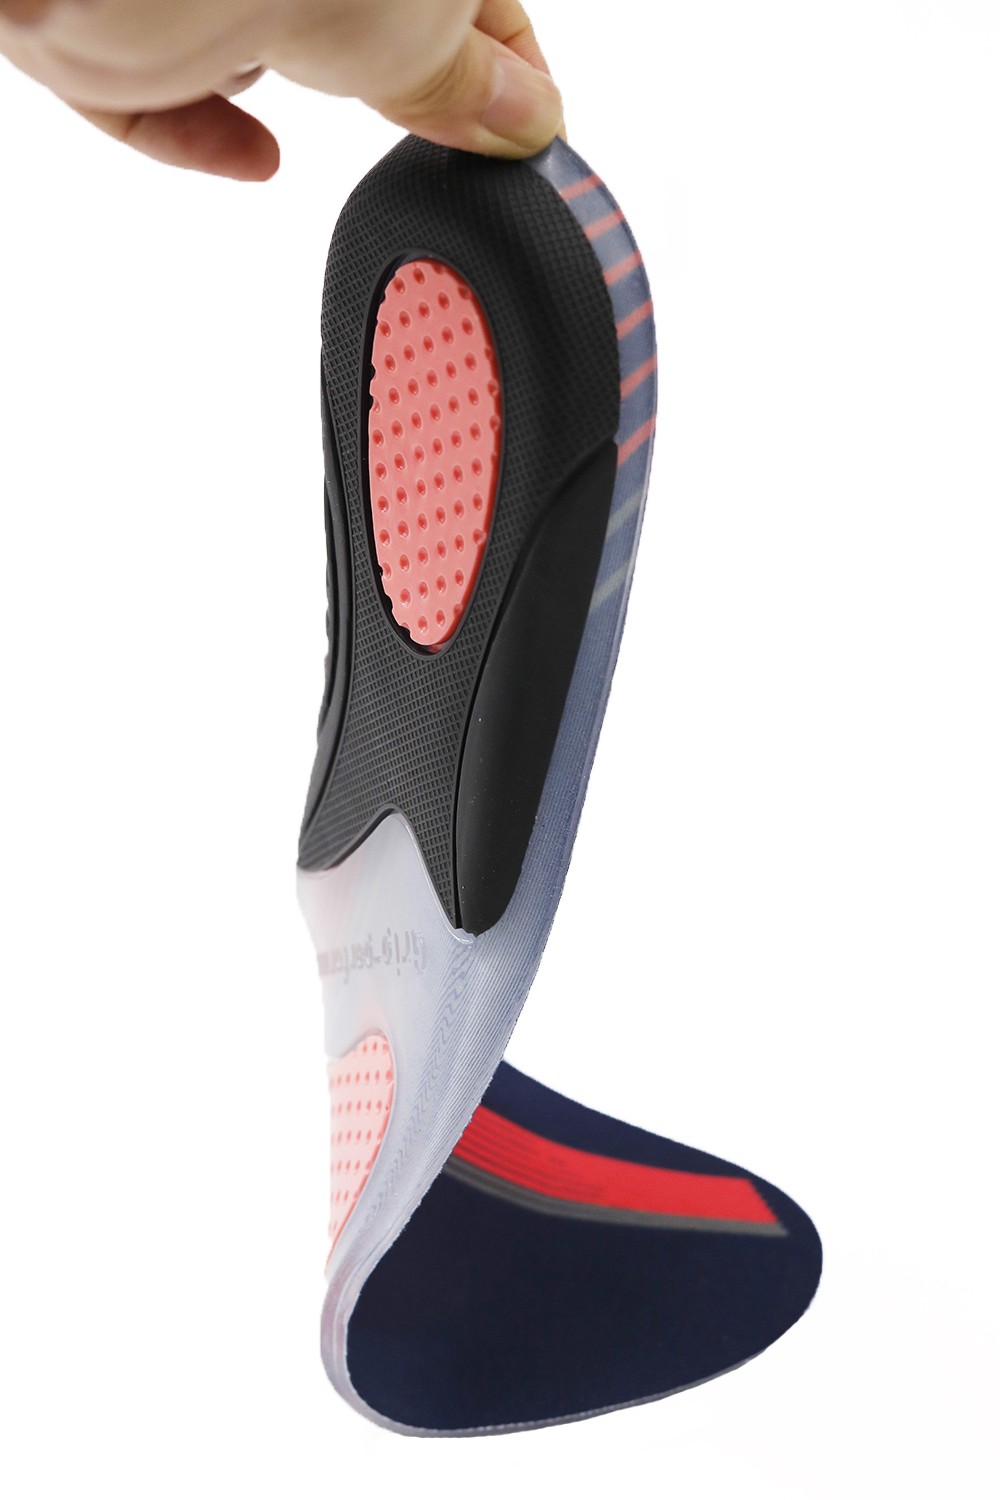 S-King High-quality gel insoles for heels company for running shoes-5